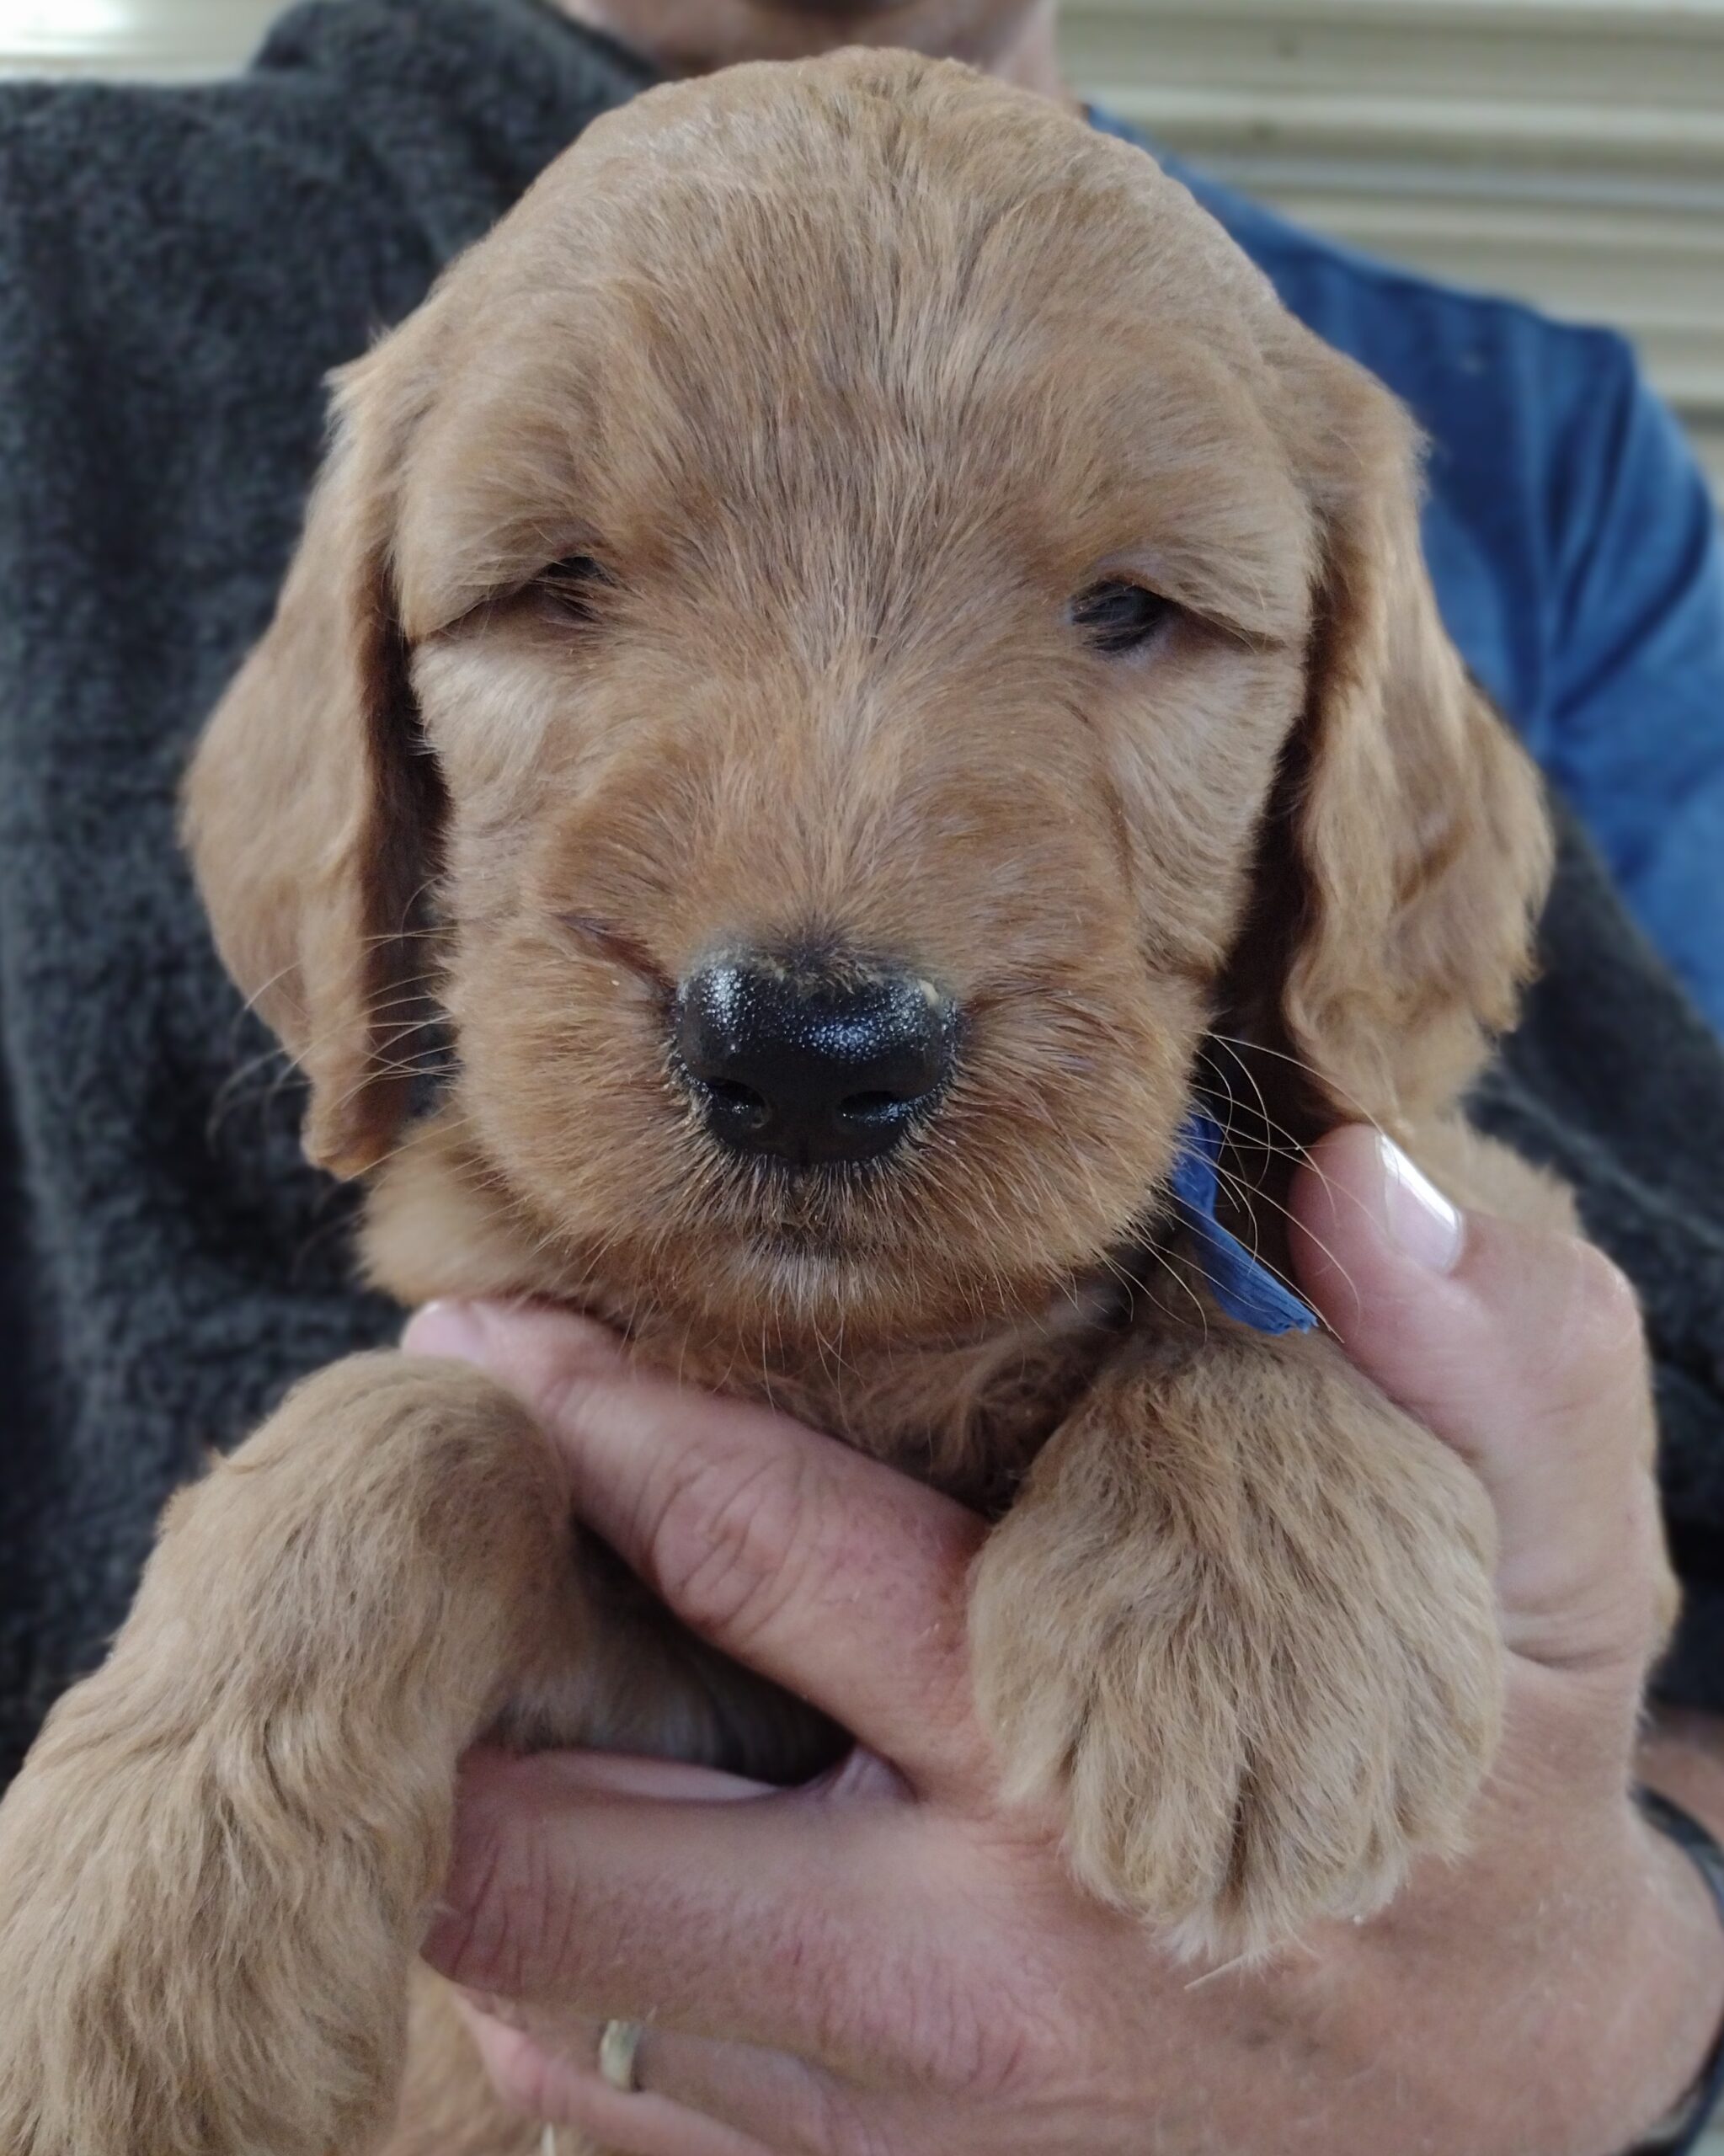 CONGRATULATIONS Bethany And Family From Watertown, MN On Your Lovely Goldendoodle Puppy From Red Cedar Farms In Hutchinson, MN!!